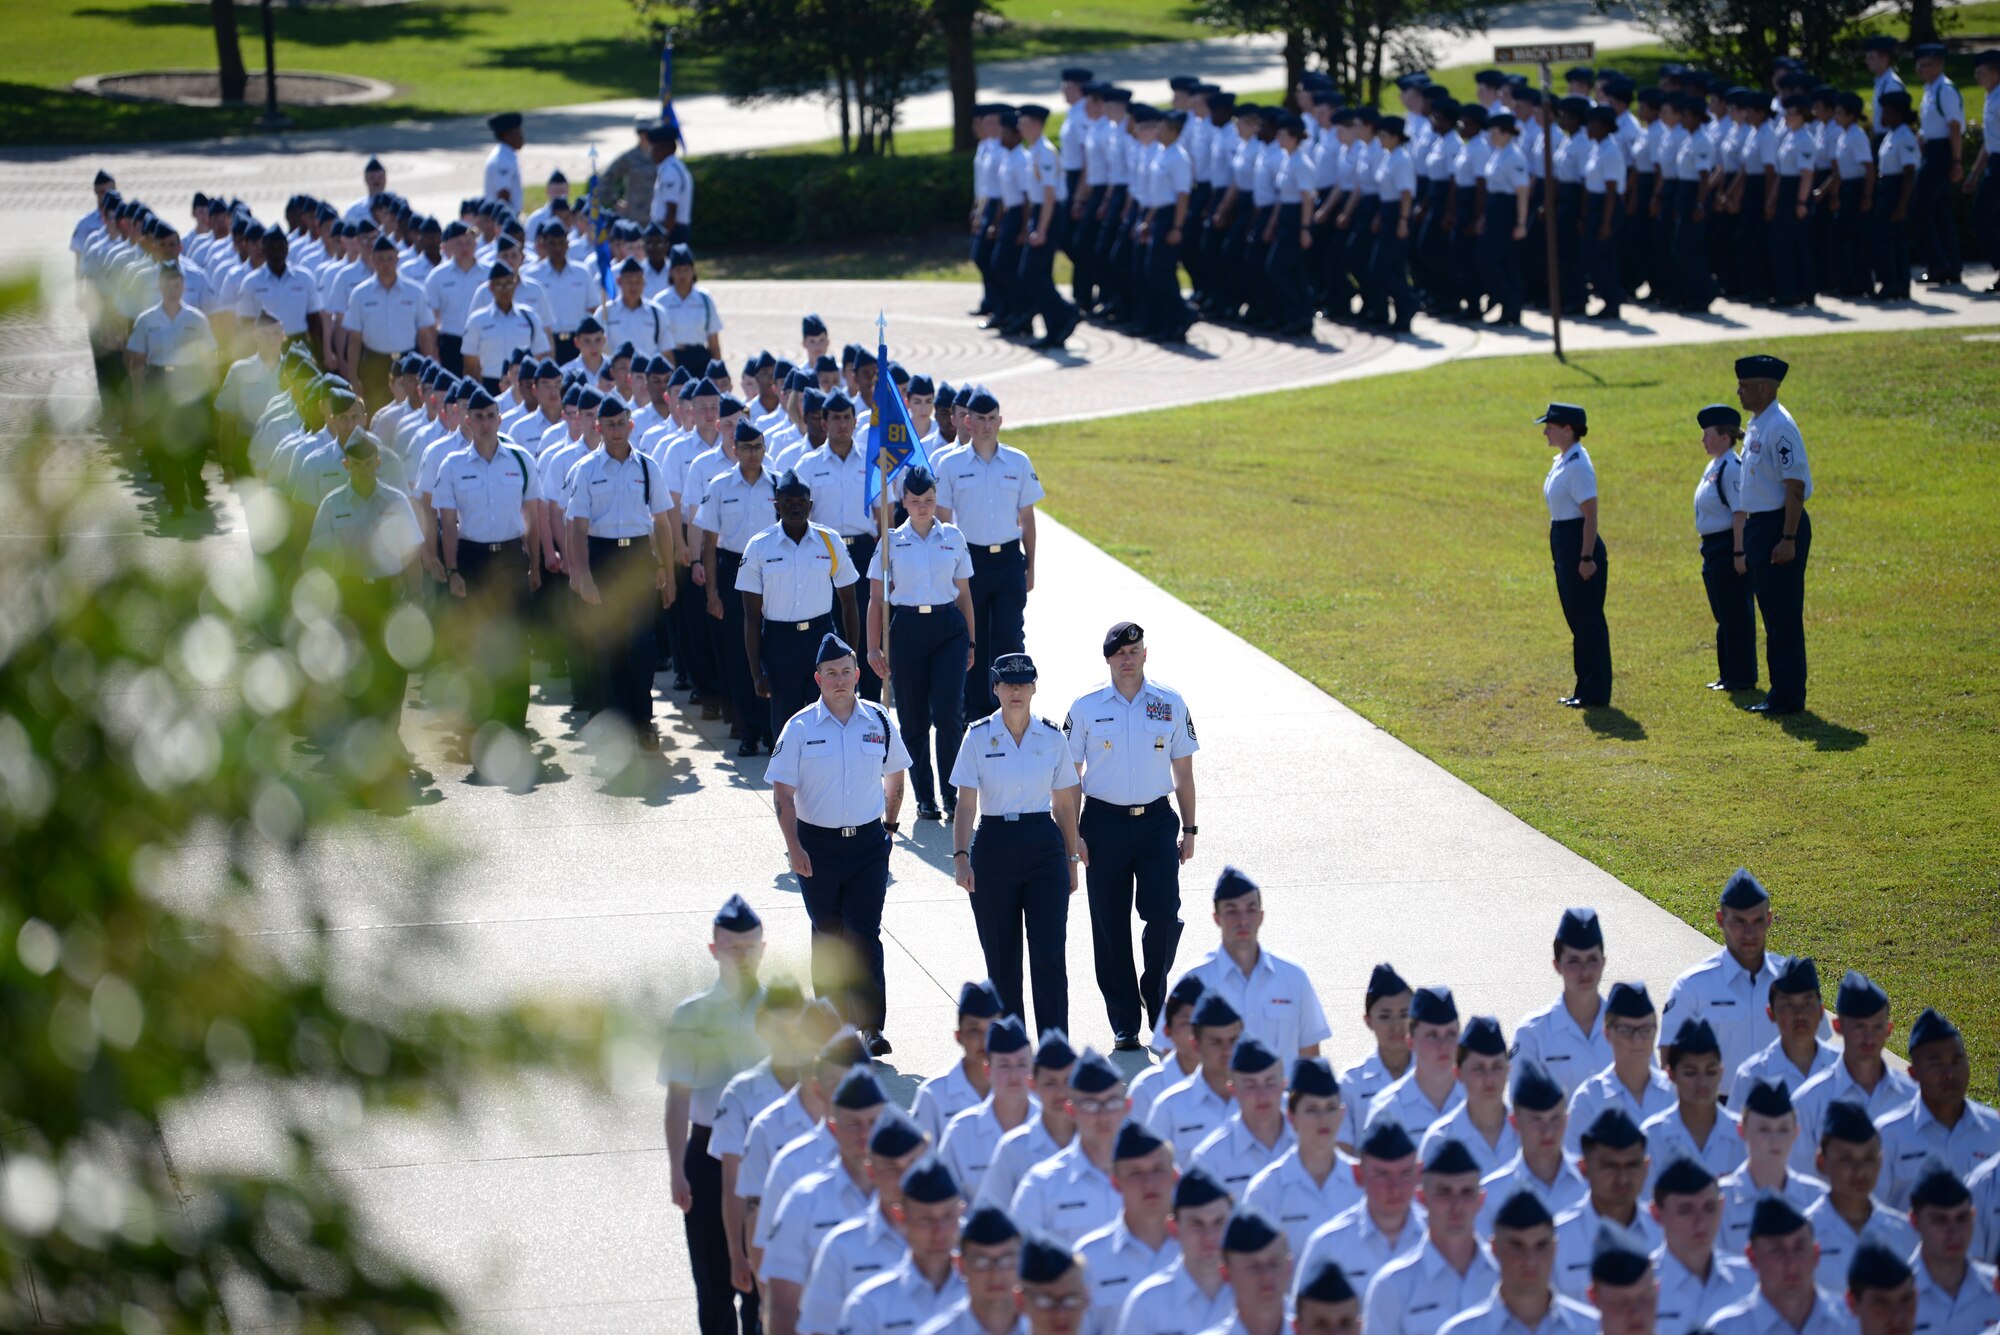 Airmen from the 81st Training Group march during the 81st Training Wing change of command ceremony on the Levitow Training Support Facility drill pad at Keesler Air Force Base, Mississippi, May 16, 2019. Col. Heather Blackwell assumed command from Col. Debra Lovette.  (U.S. Air Force photo by Airman 1st Class Spencer Tobler)